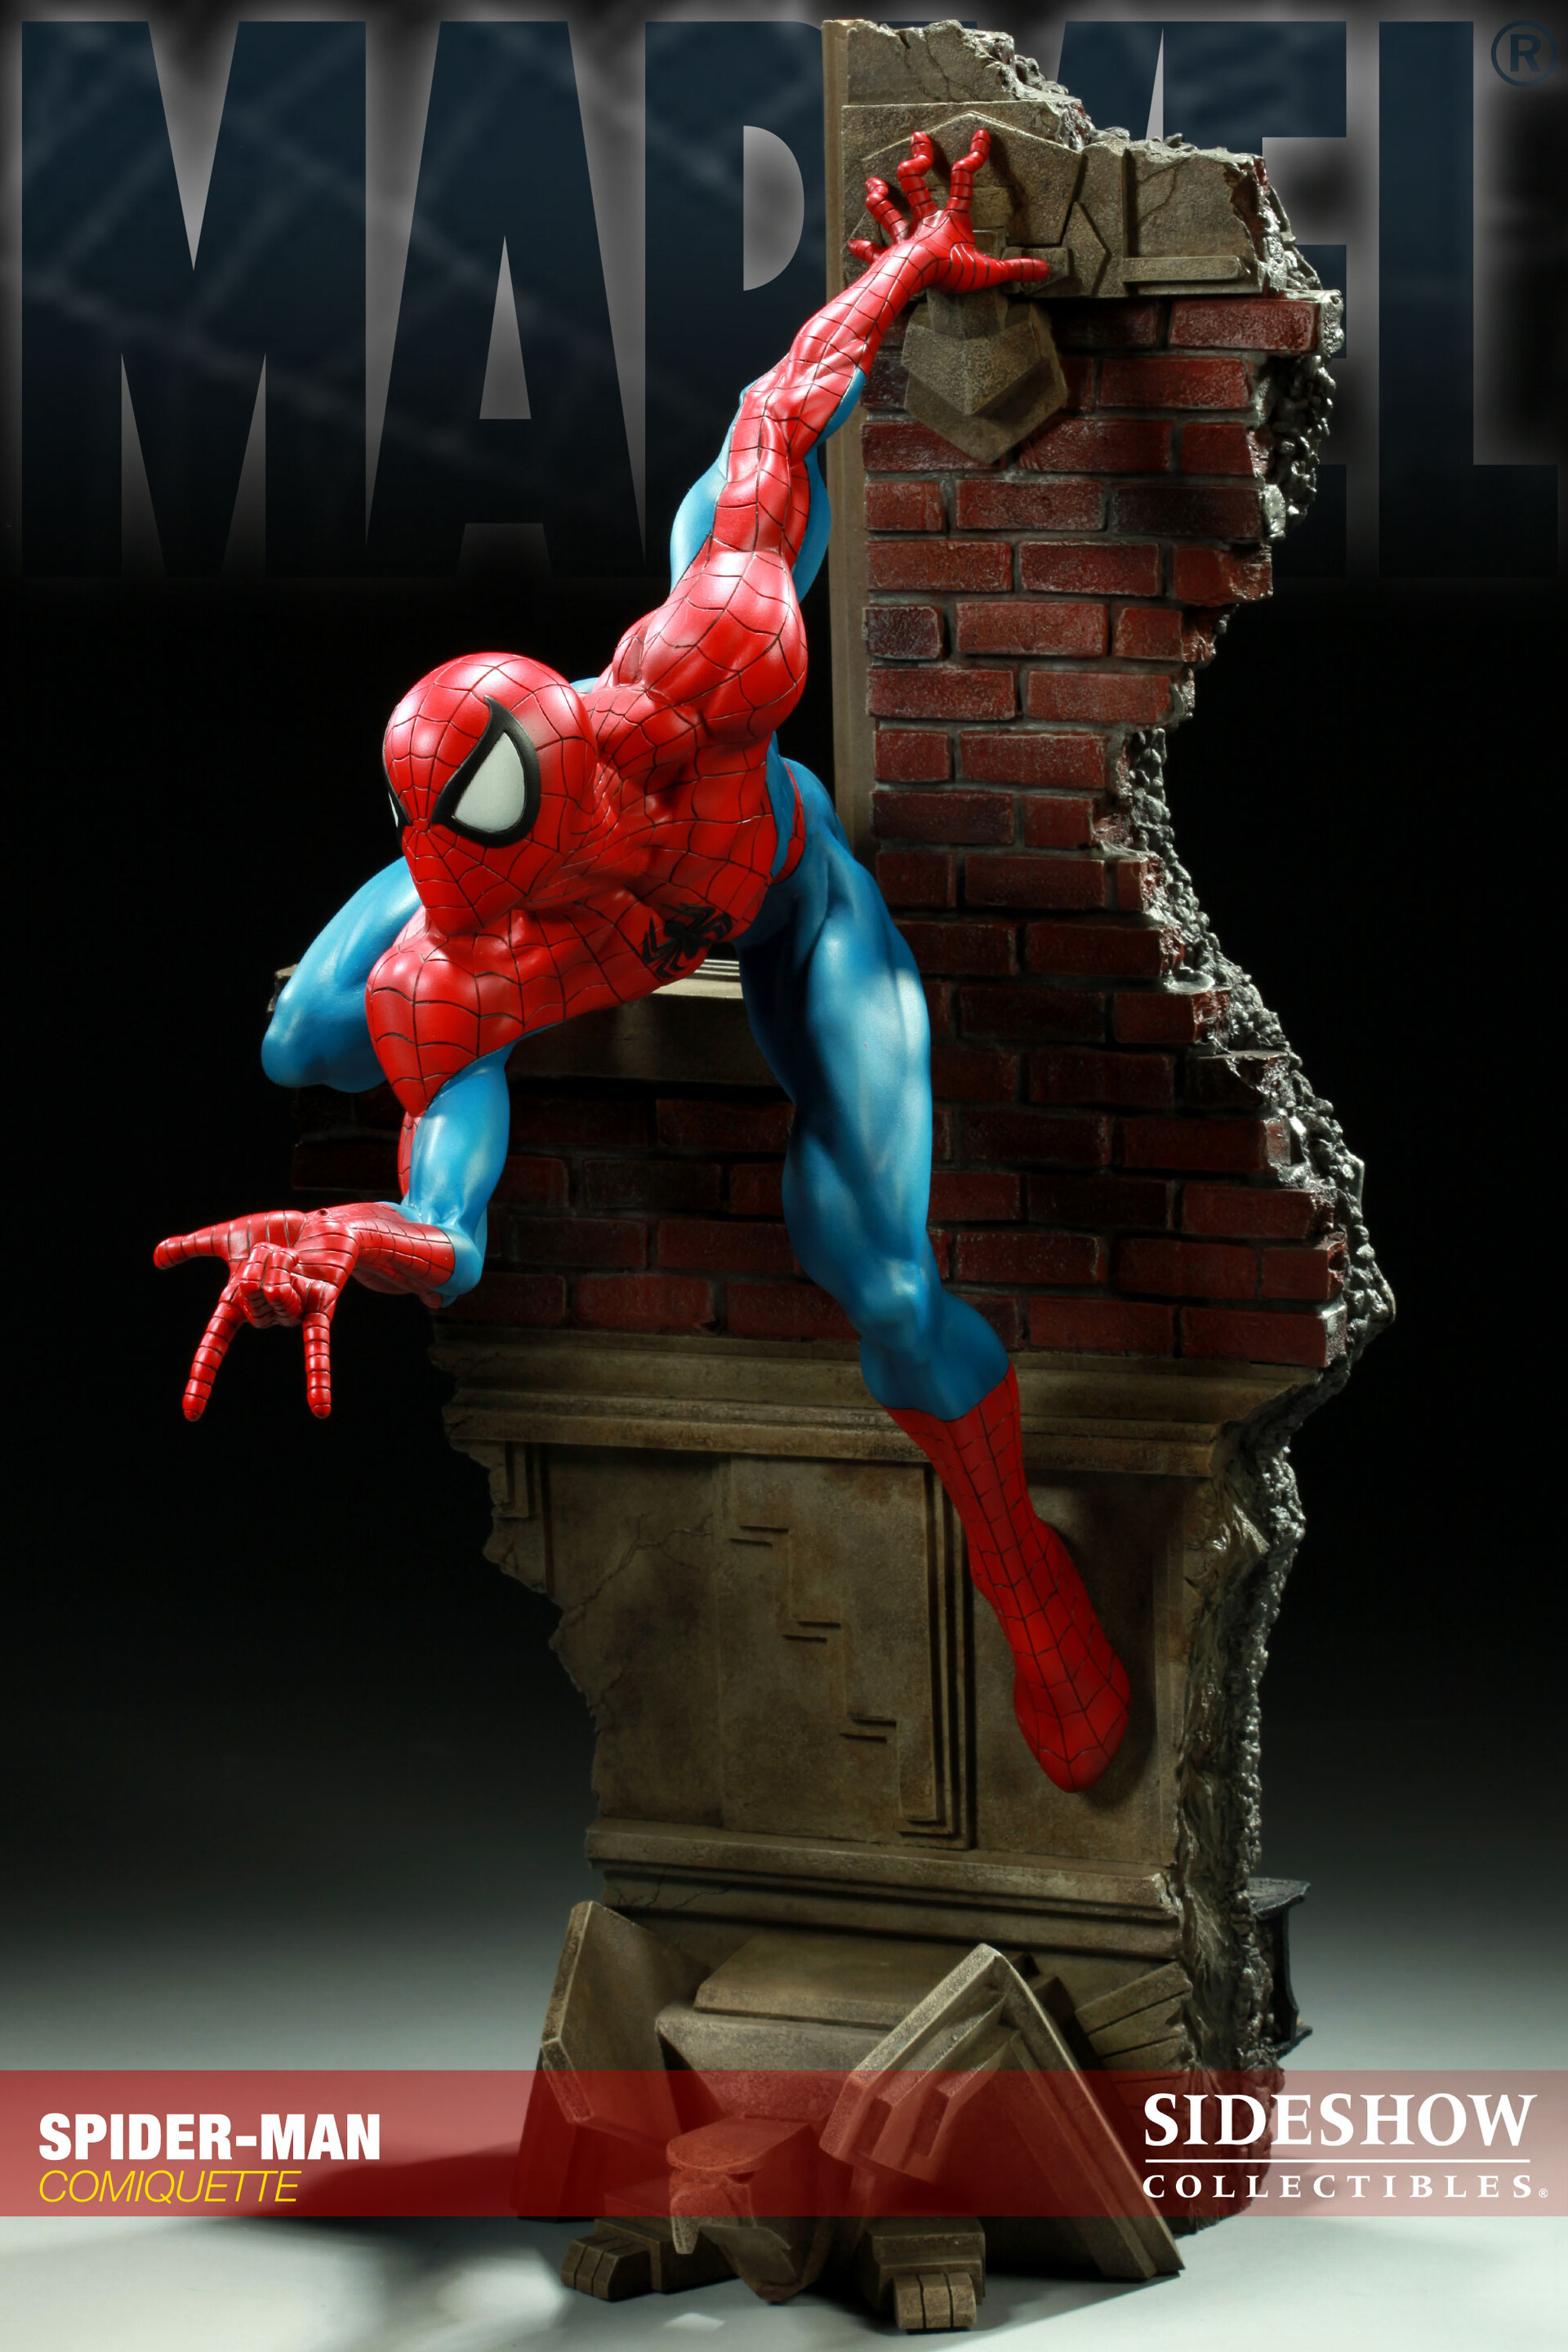 ArtStation - Spiderman Premium Format Figure by Sideshow Collectibles.